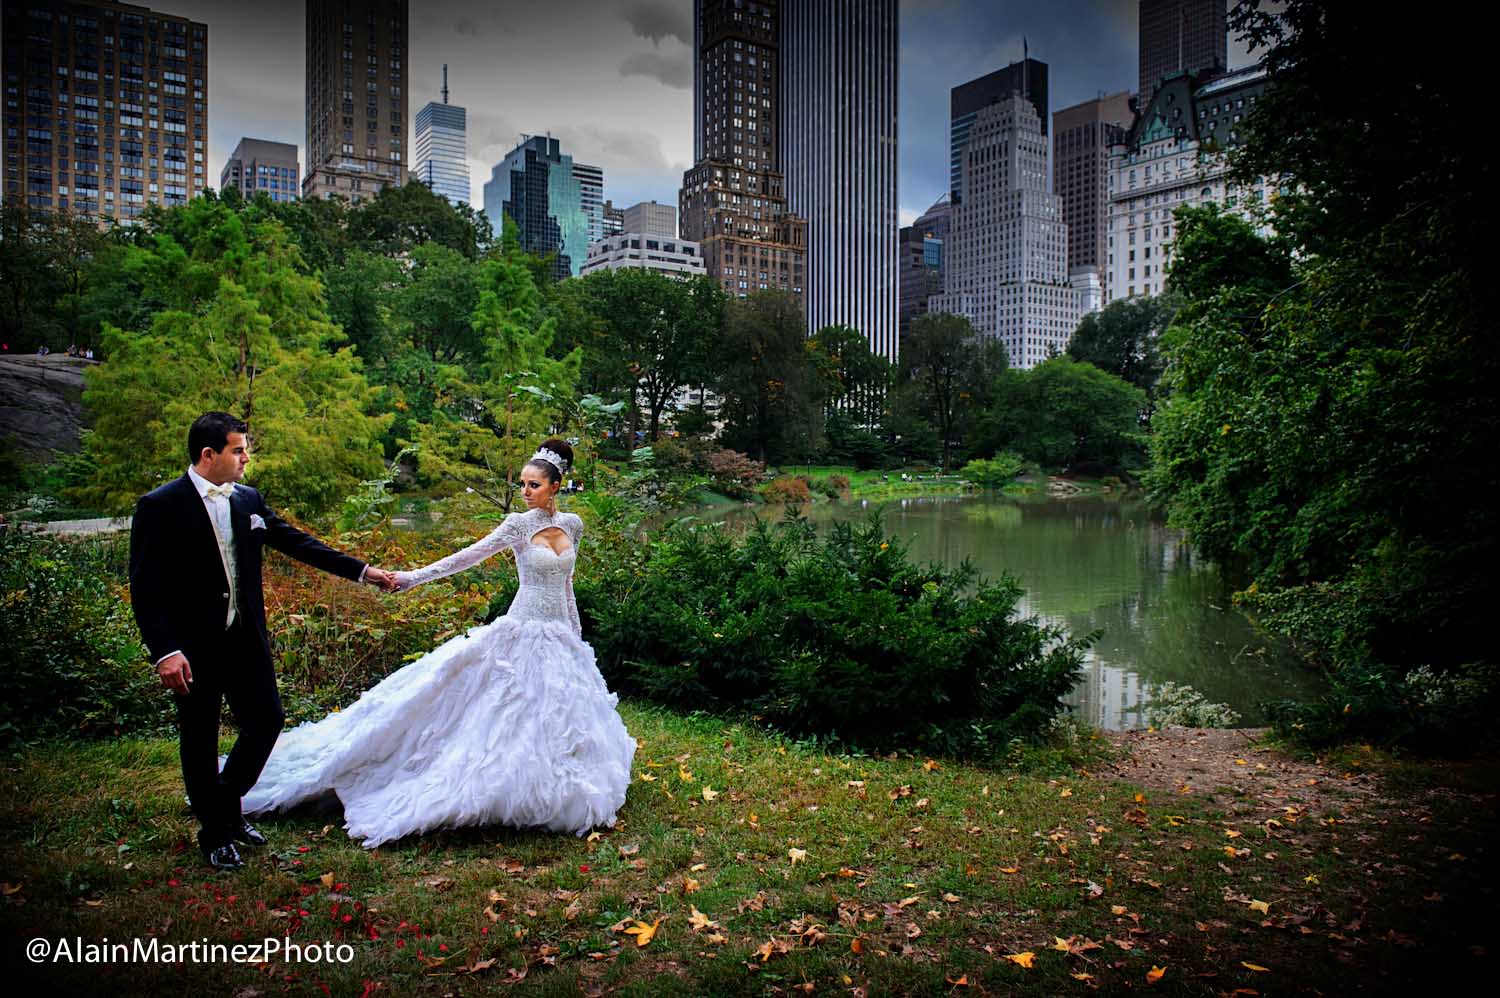 Photography in Central Park, NY | (786) 888-9111 Photographers